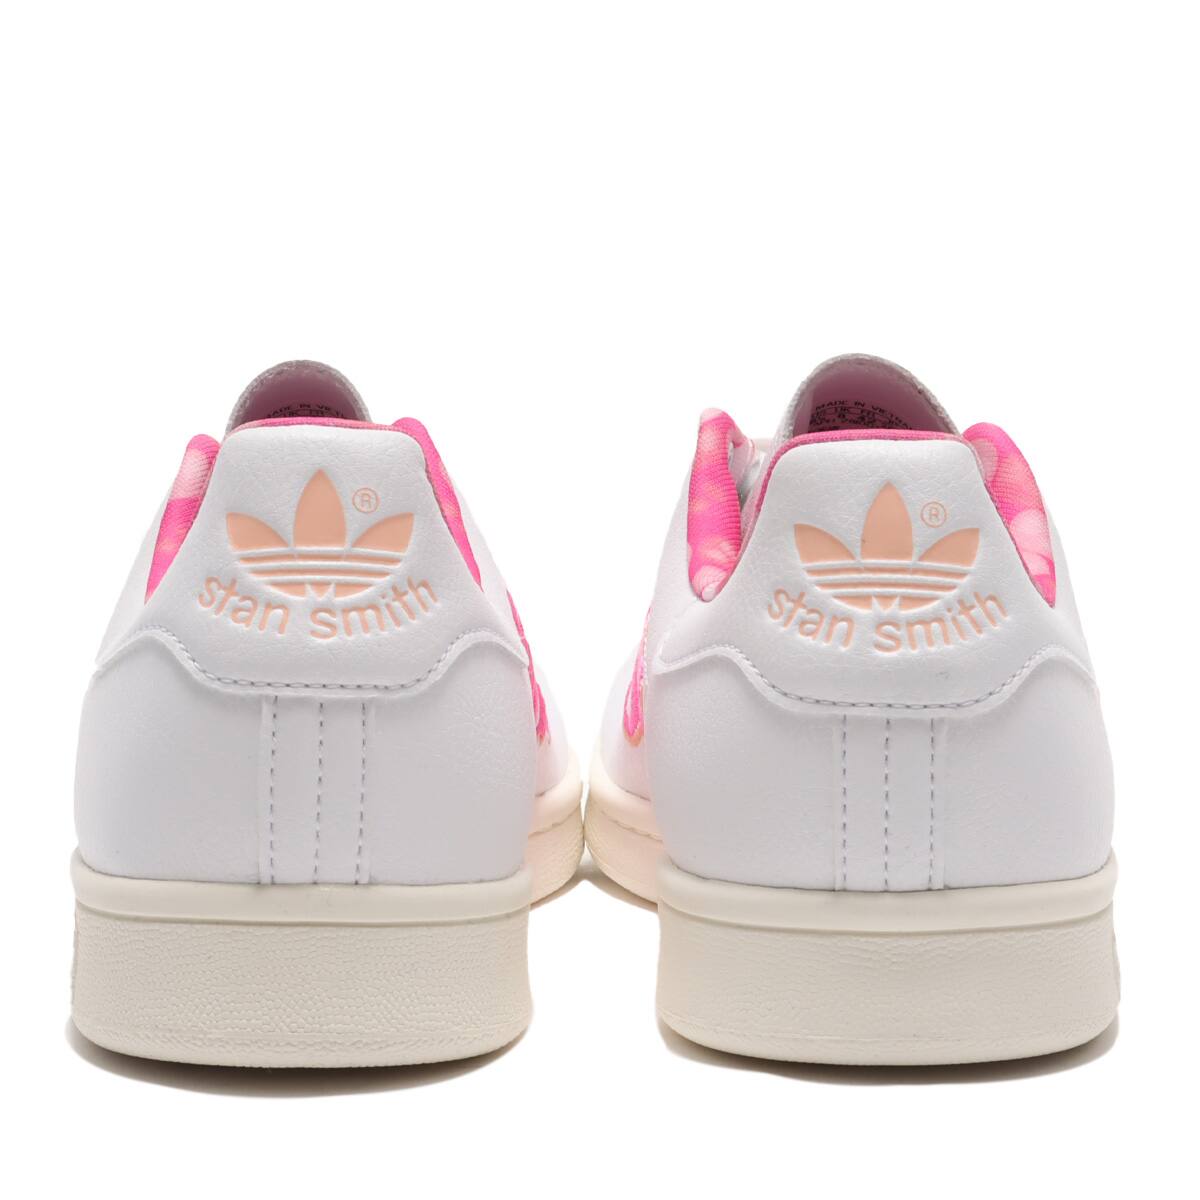 adidas STAN SMITH FOOTWEAR WHITE/SCREAMING PINK/OFF WHITE 21SS-I